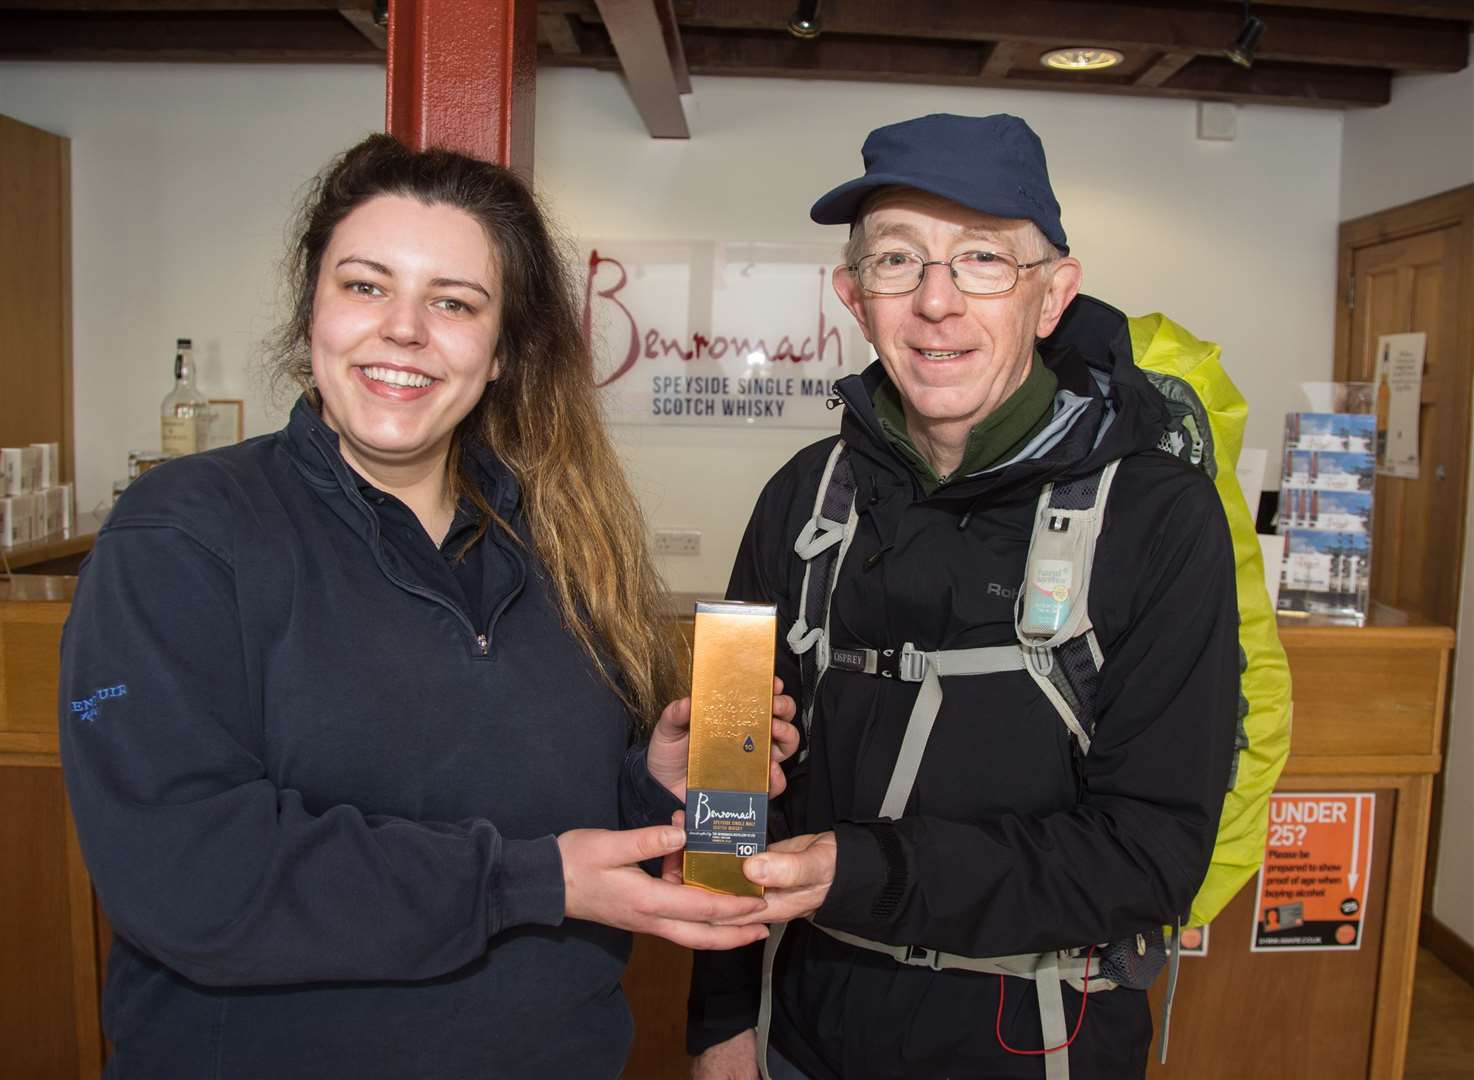 He stopped off at Benromach distillery were Lois Pace gifted him a bottle of whisky...Martin Shipley is walking round the coast of Britain to raise money for the thrombosis charity...Picture: Becky Saunderson. Image No.043517.